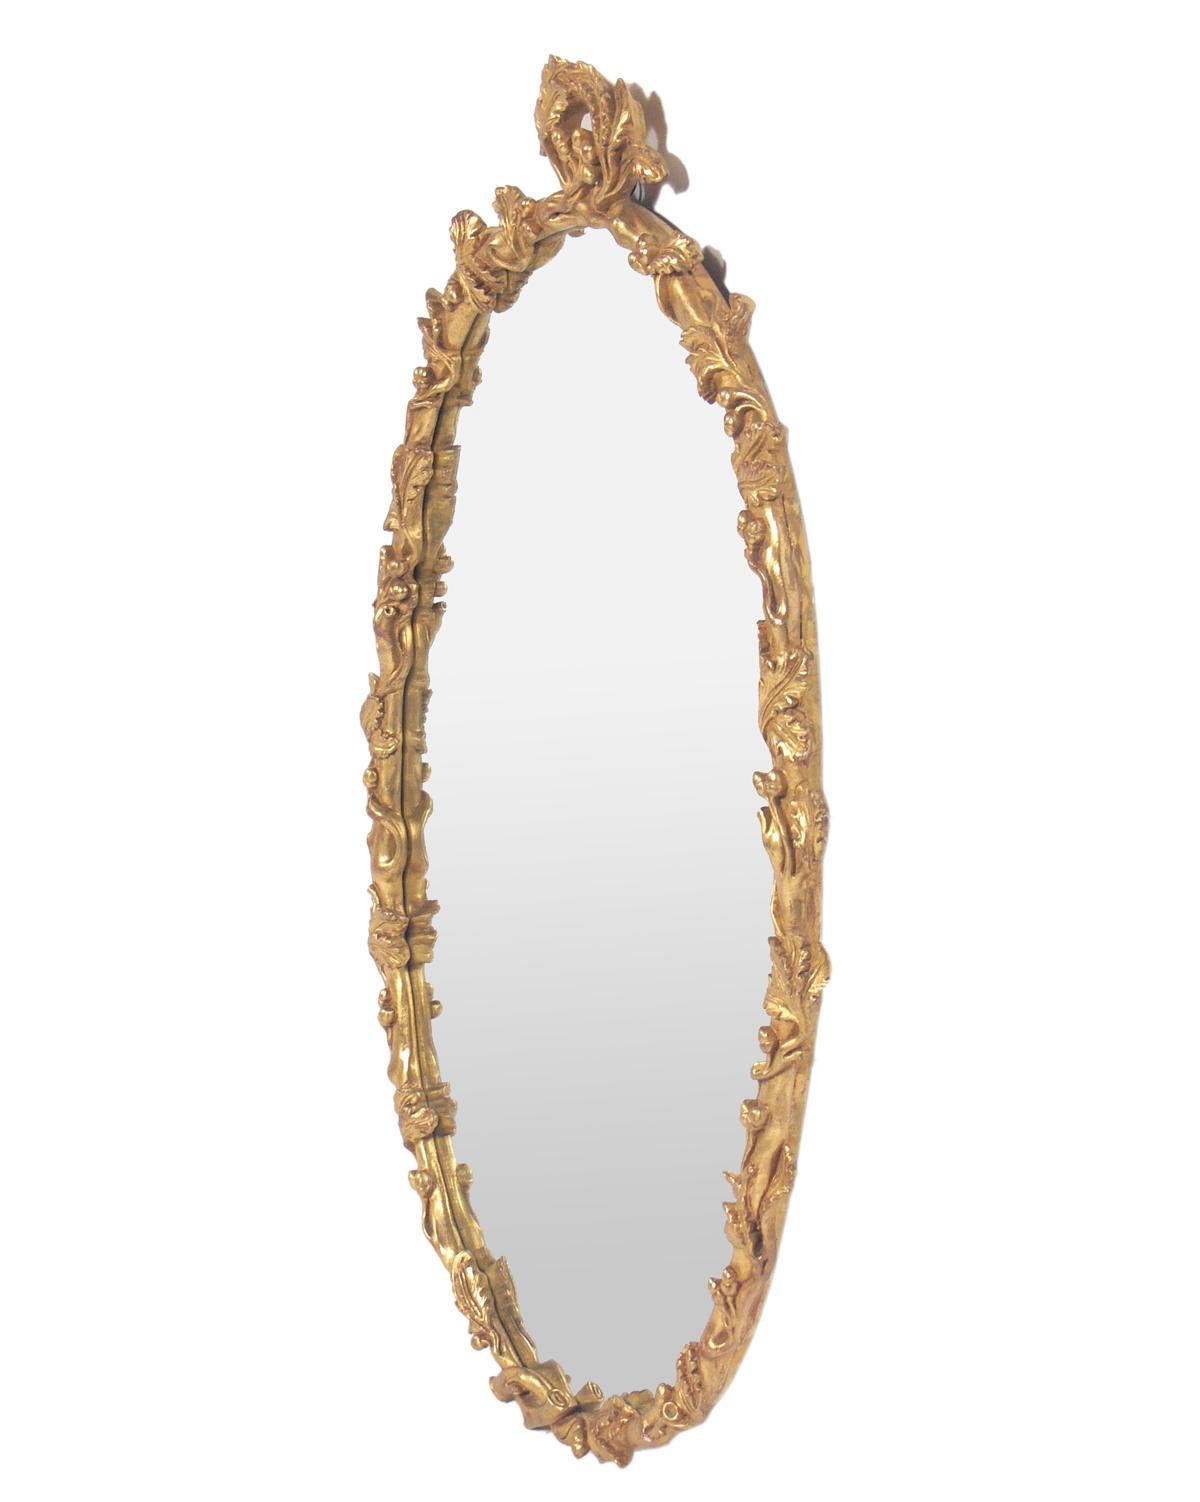 Gold Leaf Branches Mirror, probably Italian, circa 1960s. Retains warm original patina to both the gilt frame and mirror that only come with age.